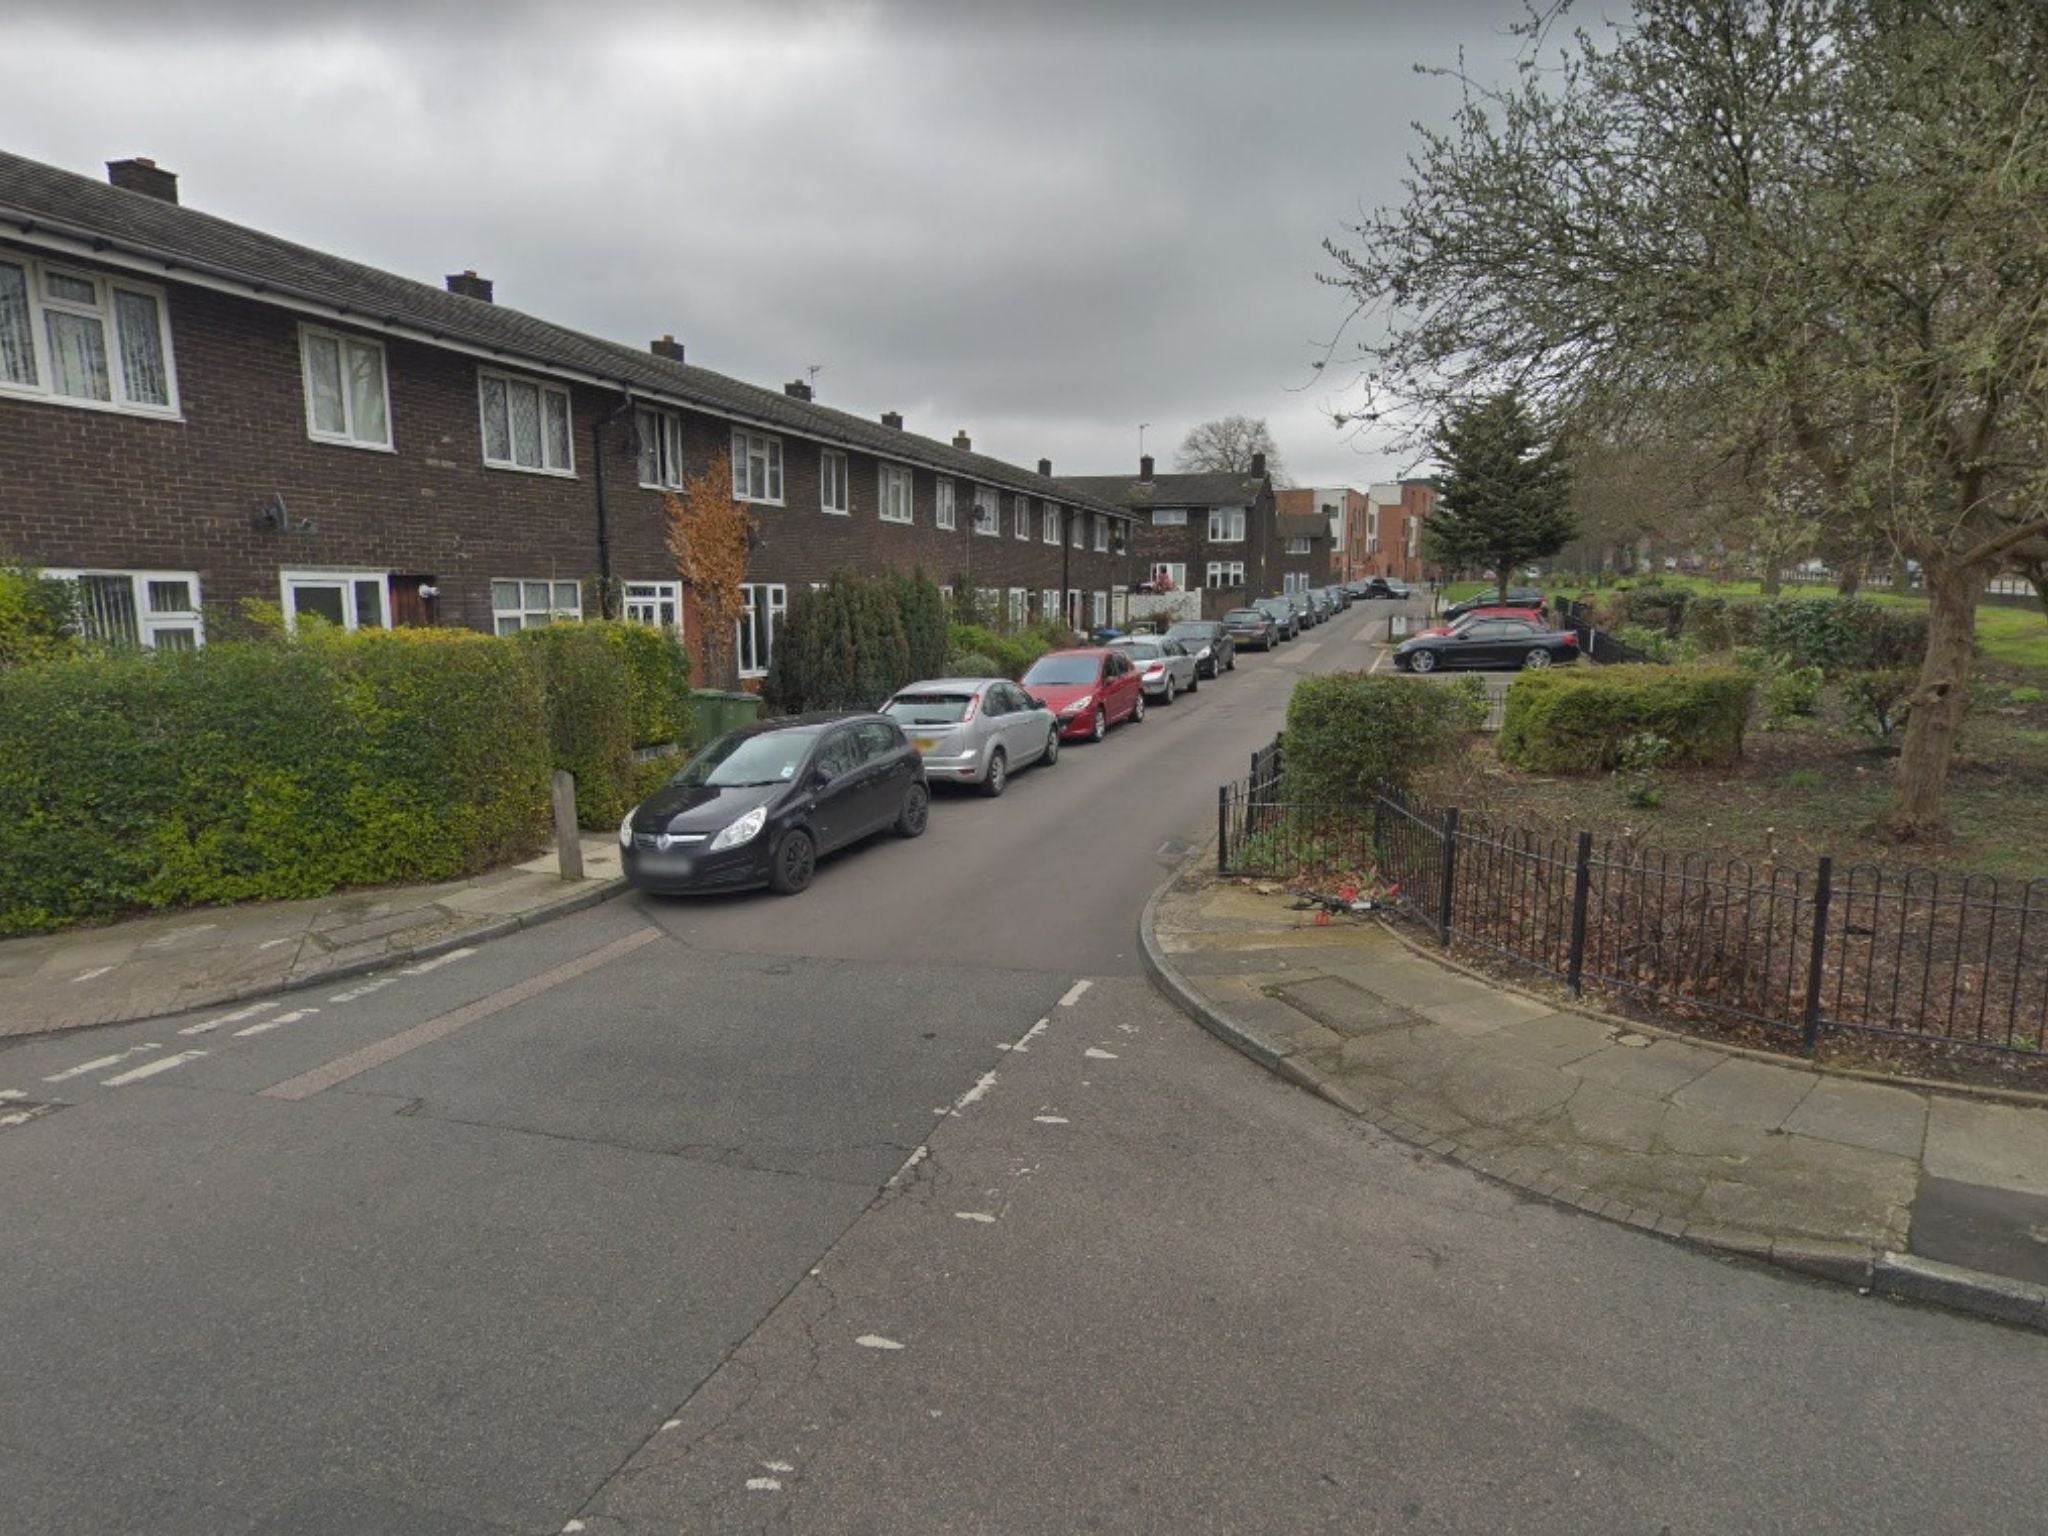 The incident took place in Tellson Avenue, Woolwich